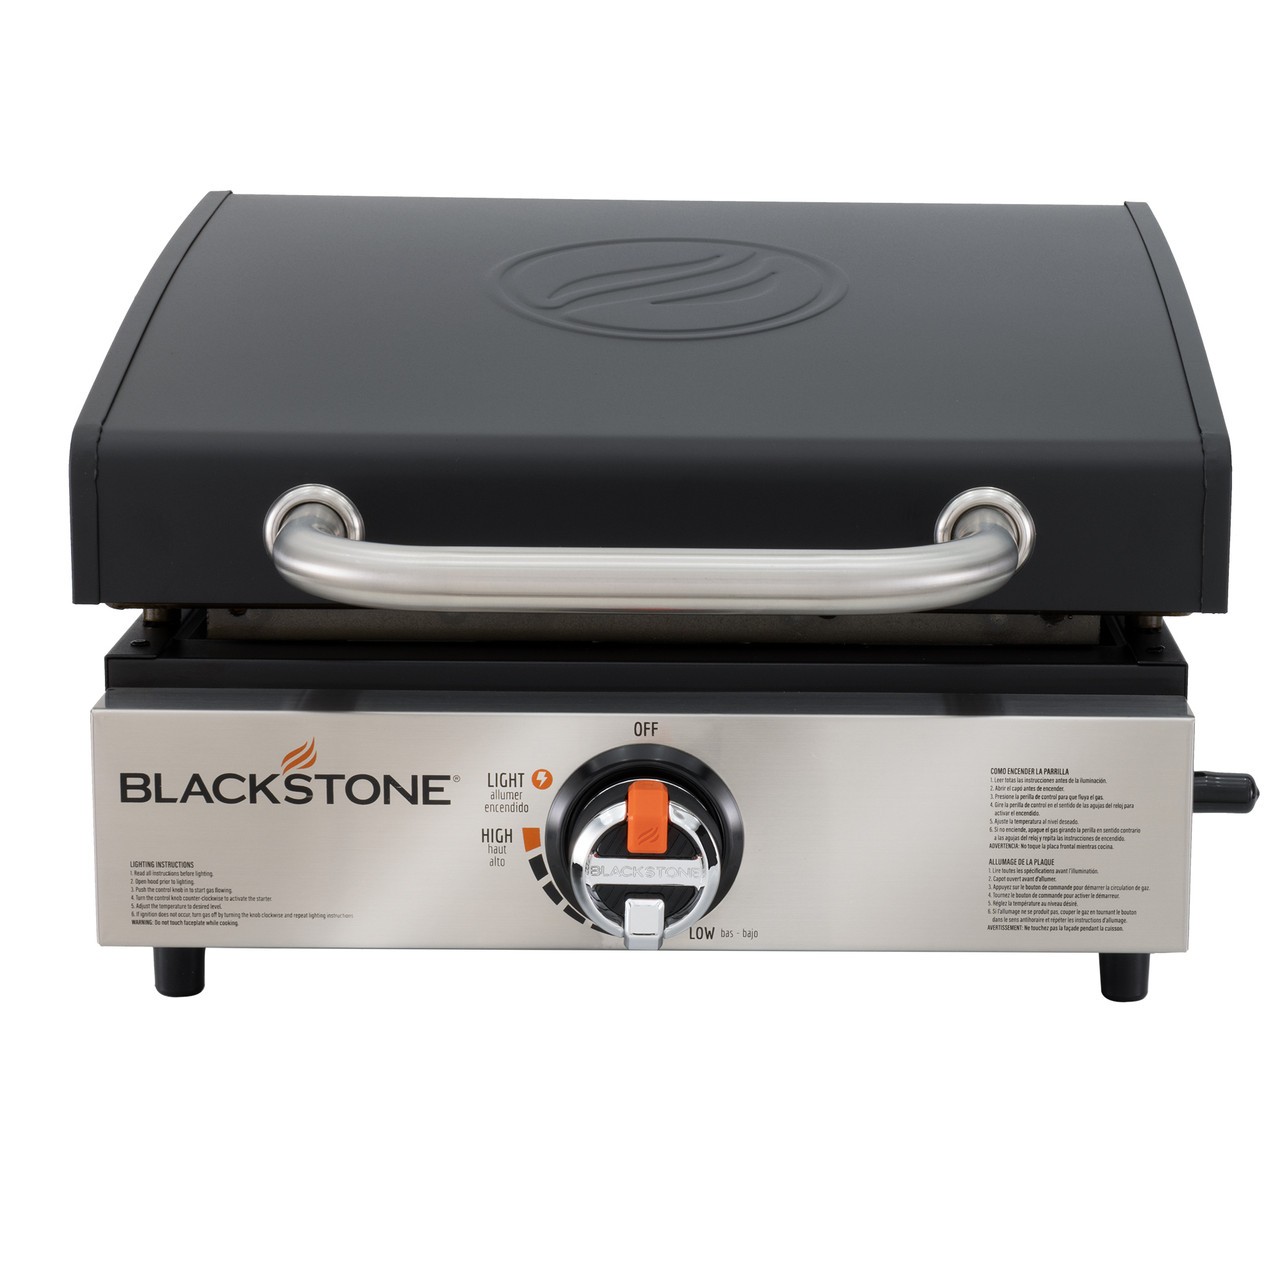 RV 22 Tabletop Griddle with Optional Hood